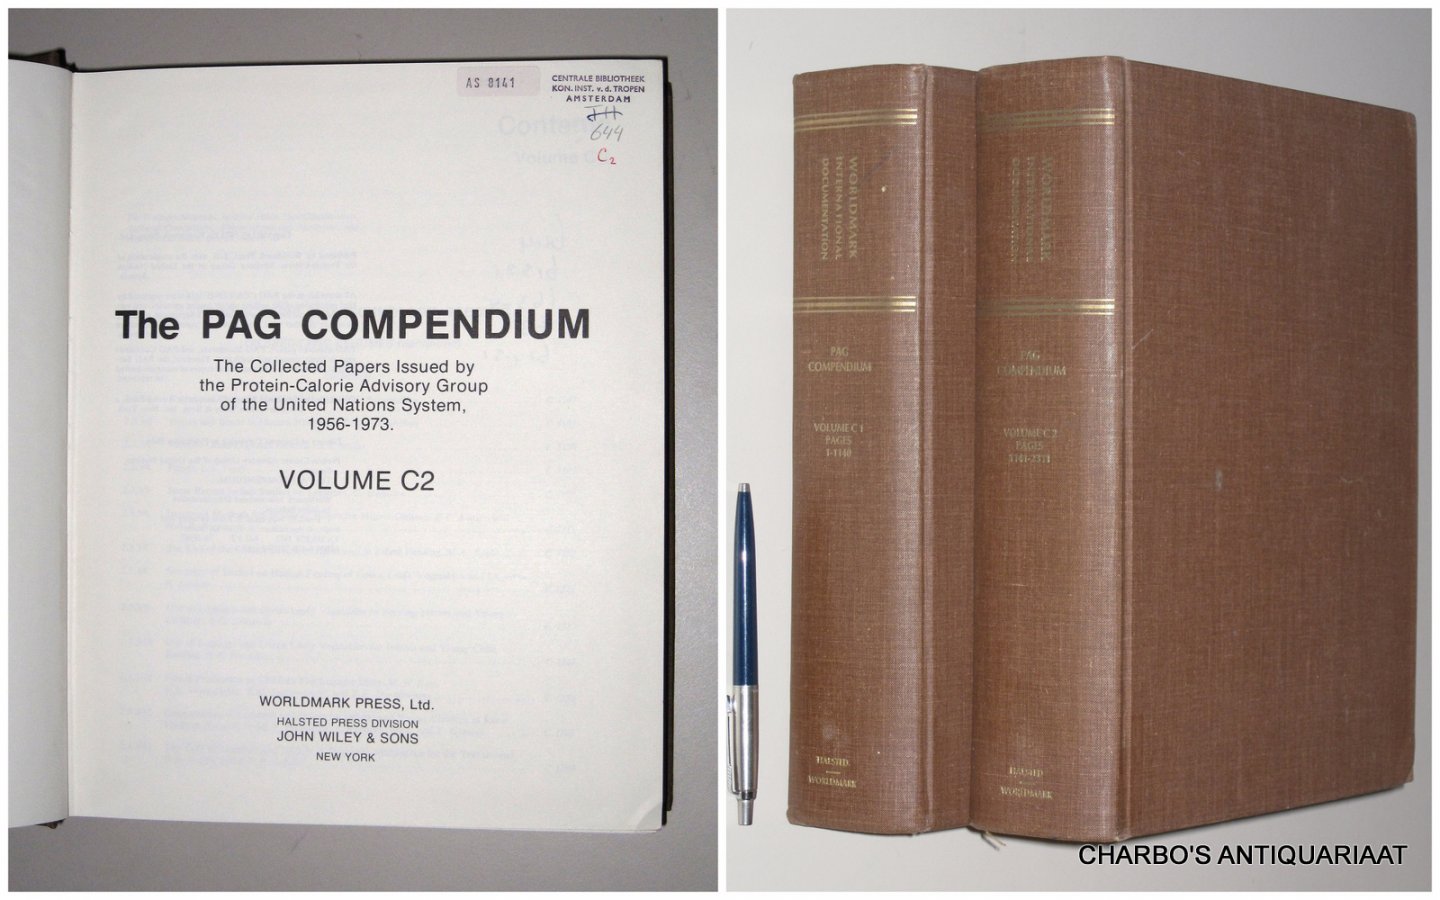 SACHS, MOSHE Y. (ed.), - The PAG compendium. The collected papers issued by the Protein-Calorie Advisory Group of the United Nations System, 1956-1973. Volumes C1 & C2 (Food science and technology, specific).